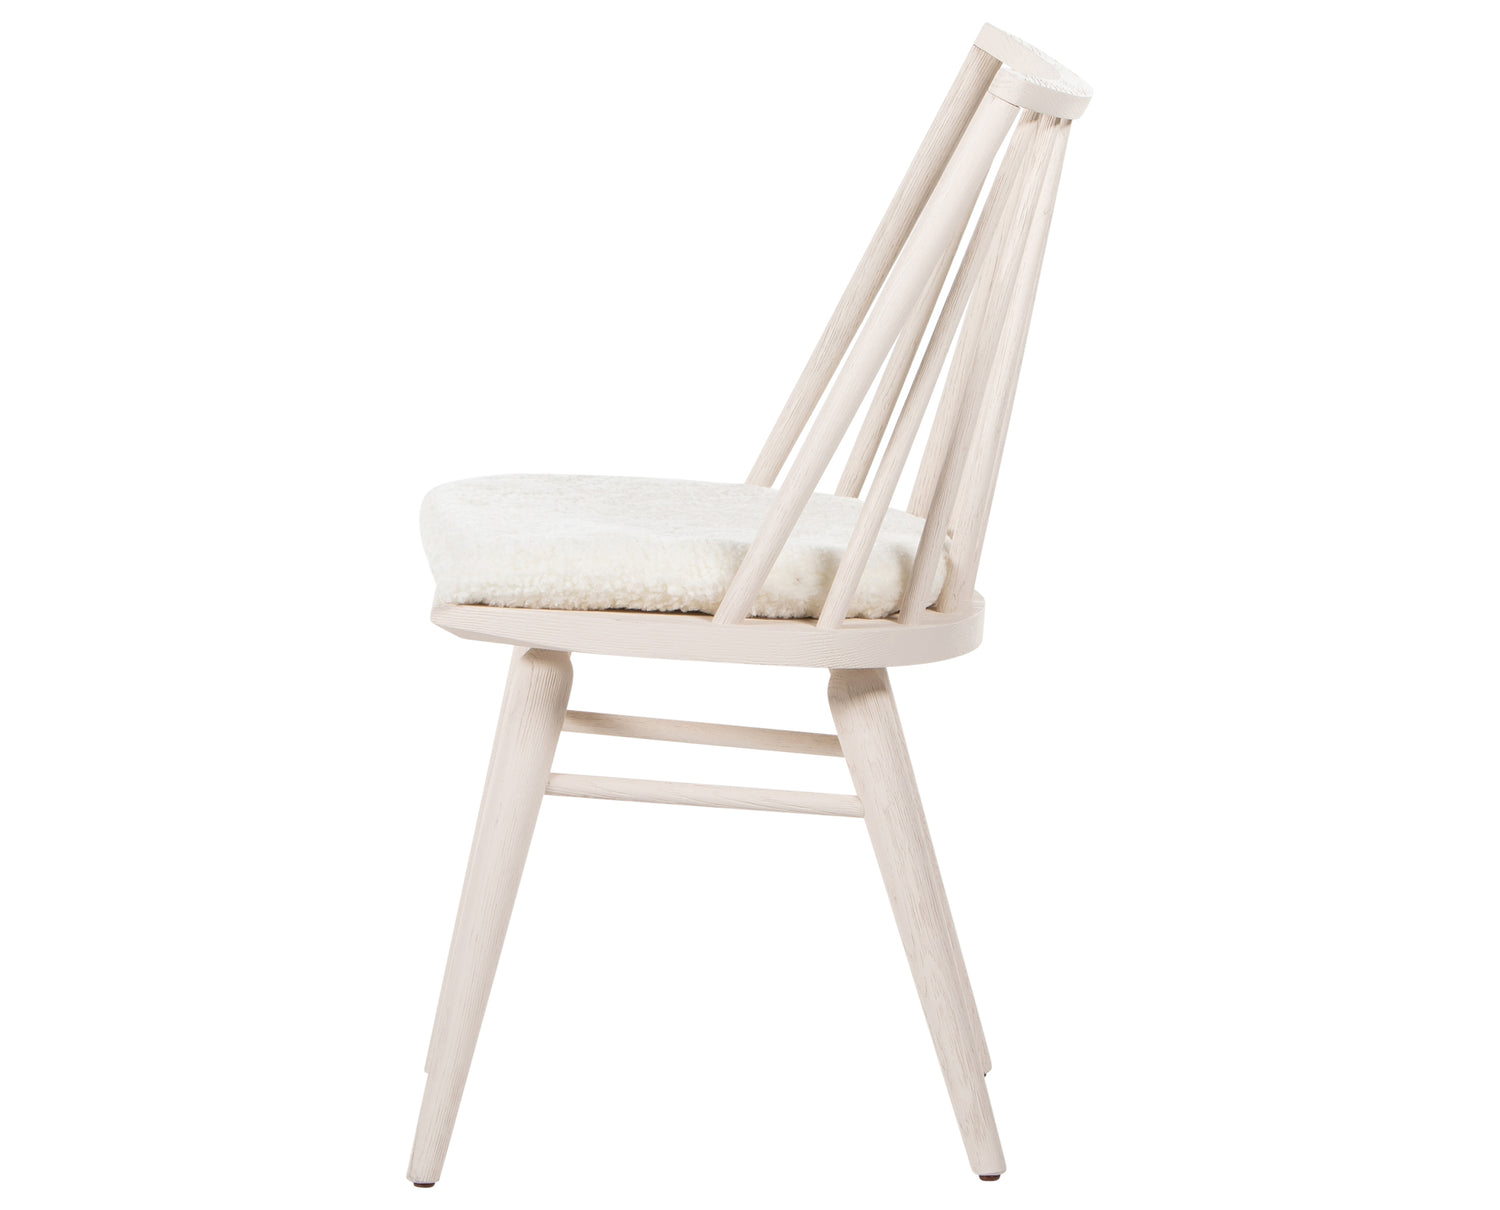 Off White Oak & Cream Shorn Sheepskin with Ivory Backing Fabric | Lewis Windsor Chair | Valley Ridge Furniture